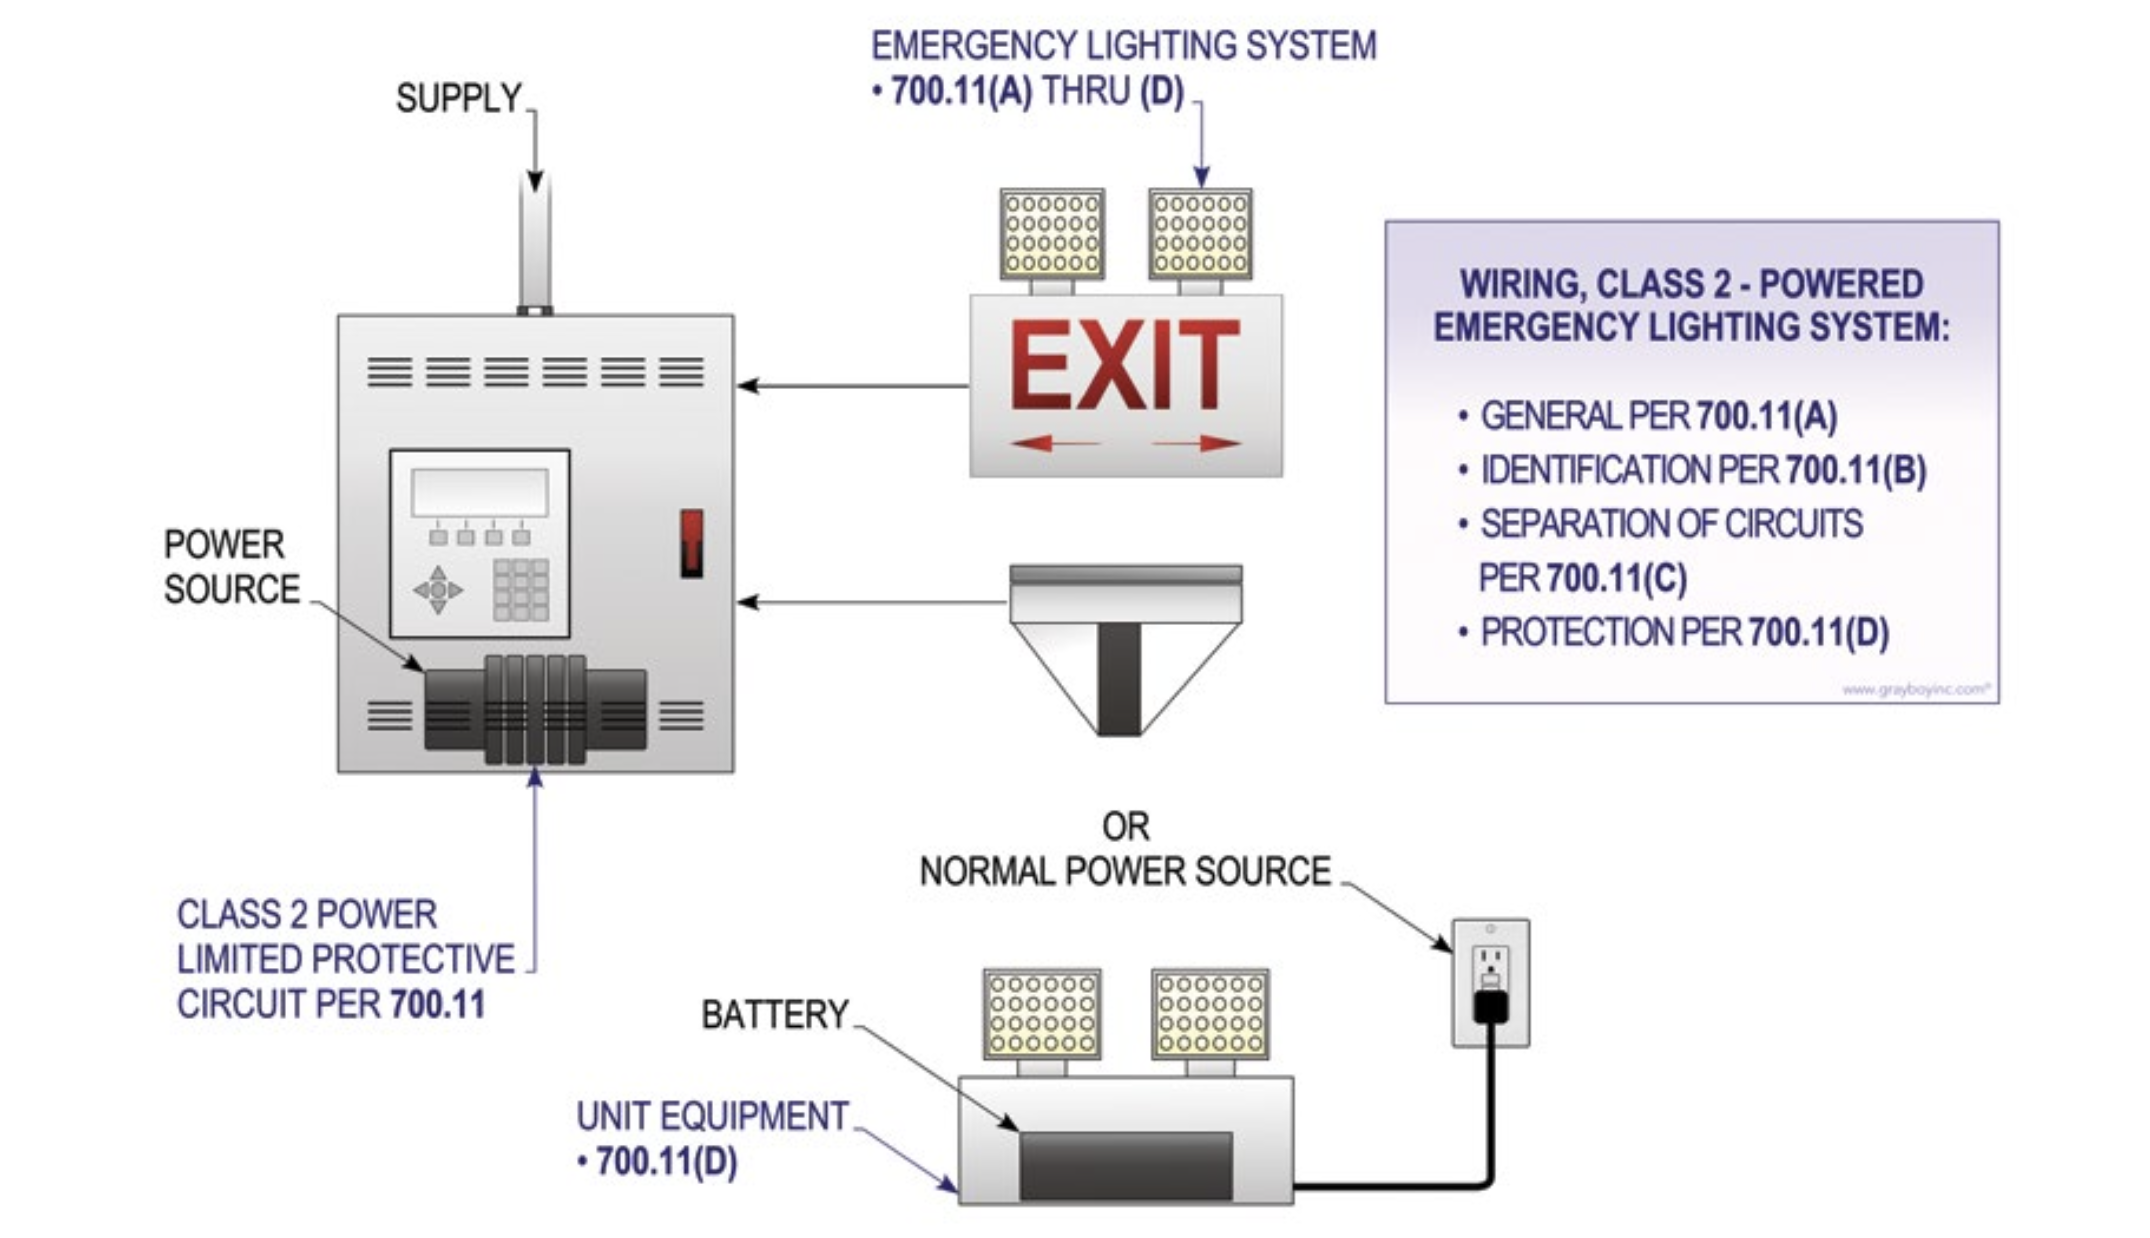 700.11 Wiring, Class-2-Powered Emergency Lighting Systems.